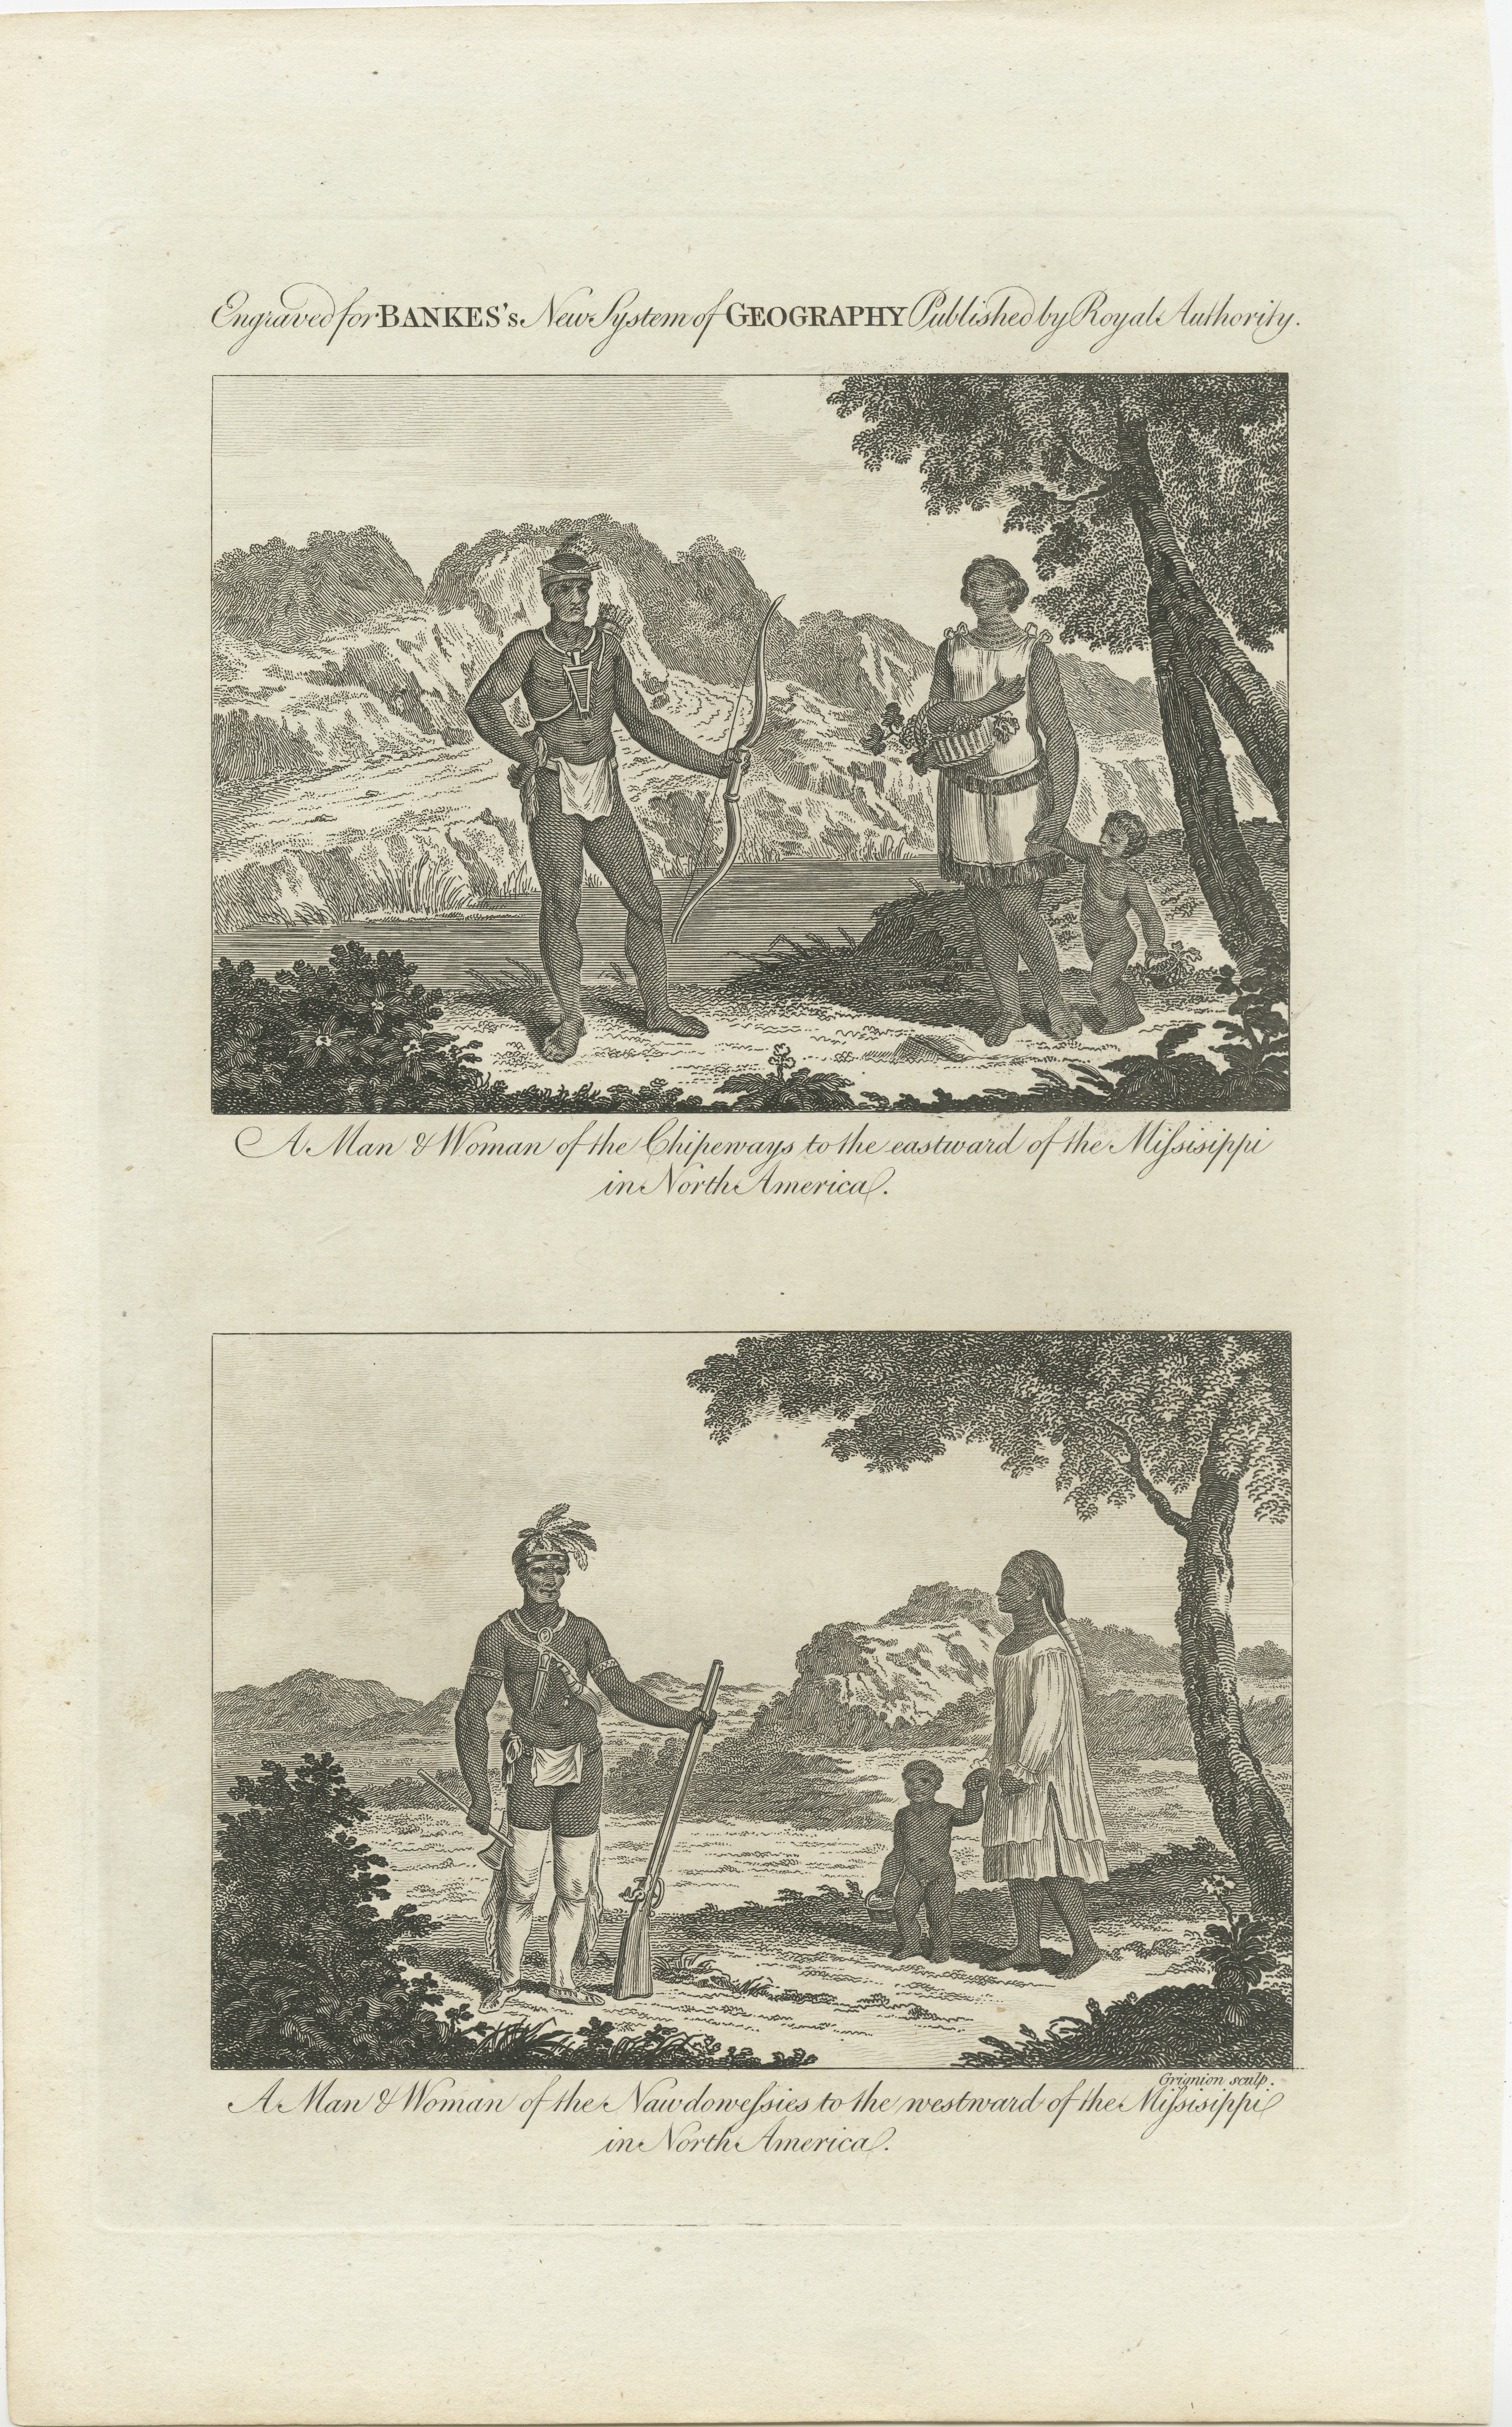 The original antique print is a pair of original engravings from 